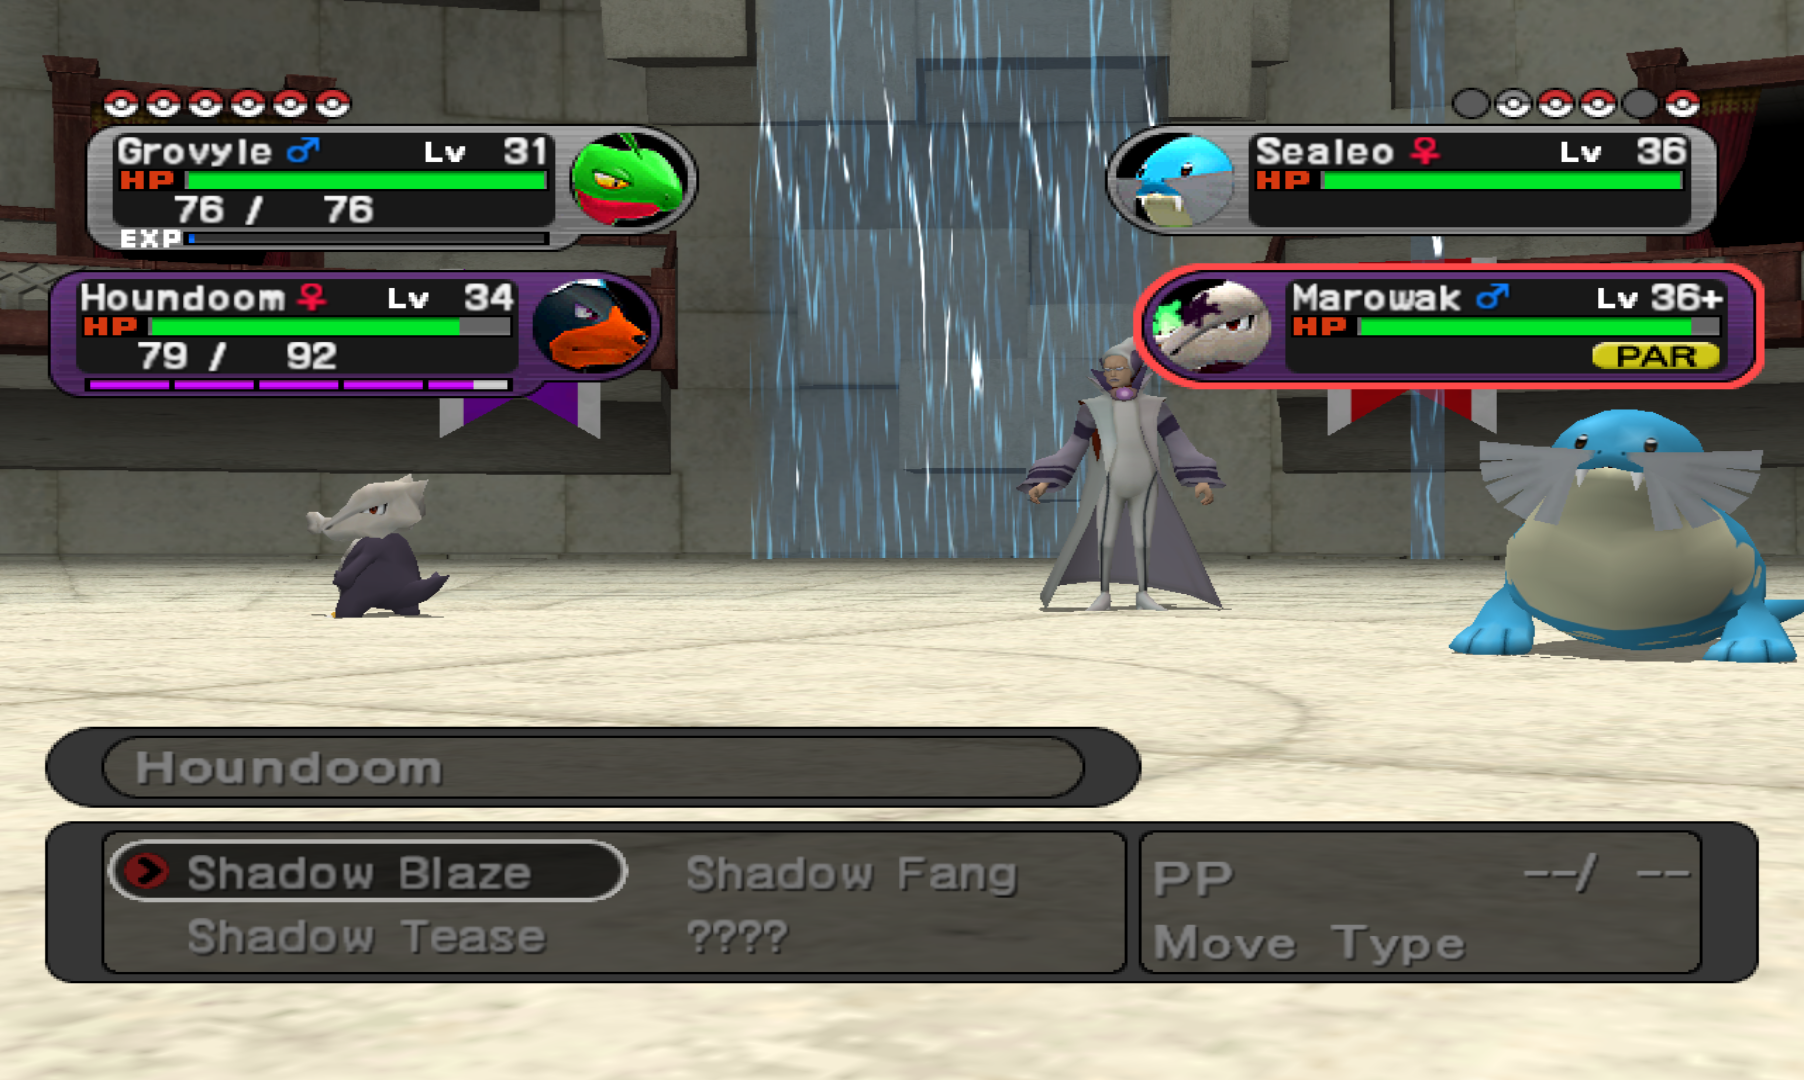 Pokemon XD: Gale Of Darkness Cheats, Hints, Tips, And Tricks